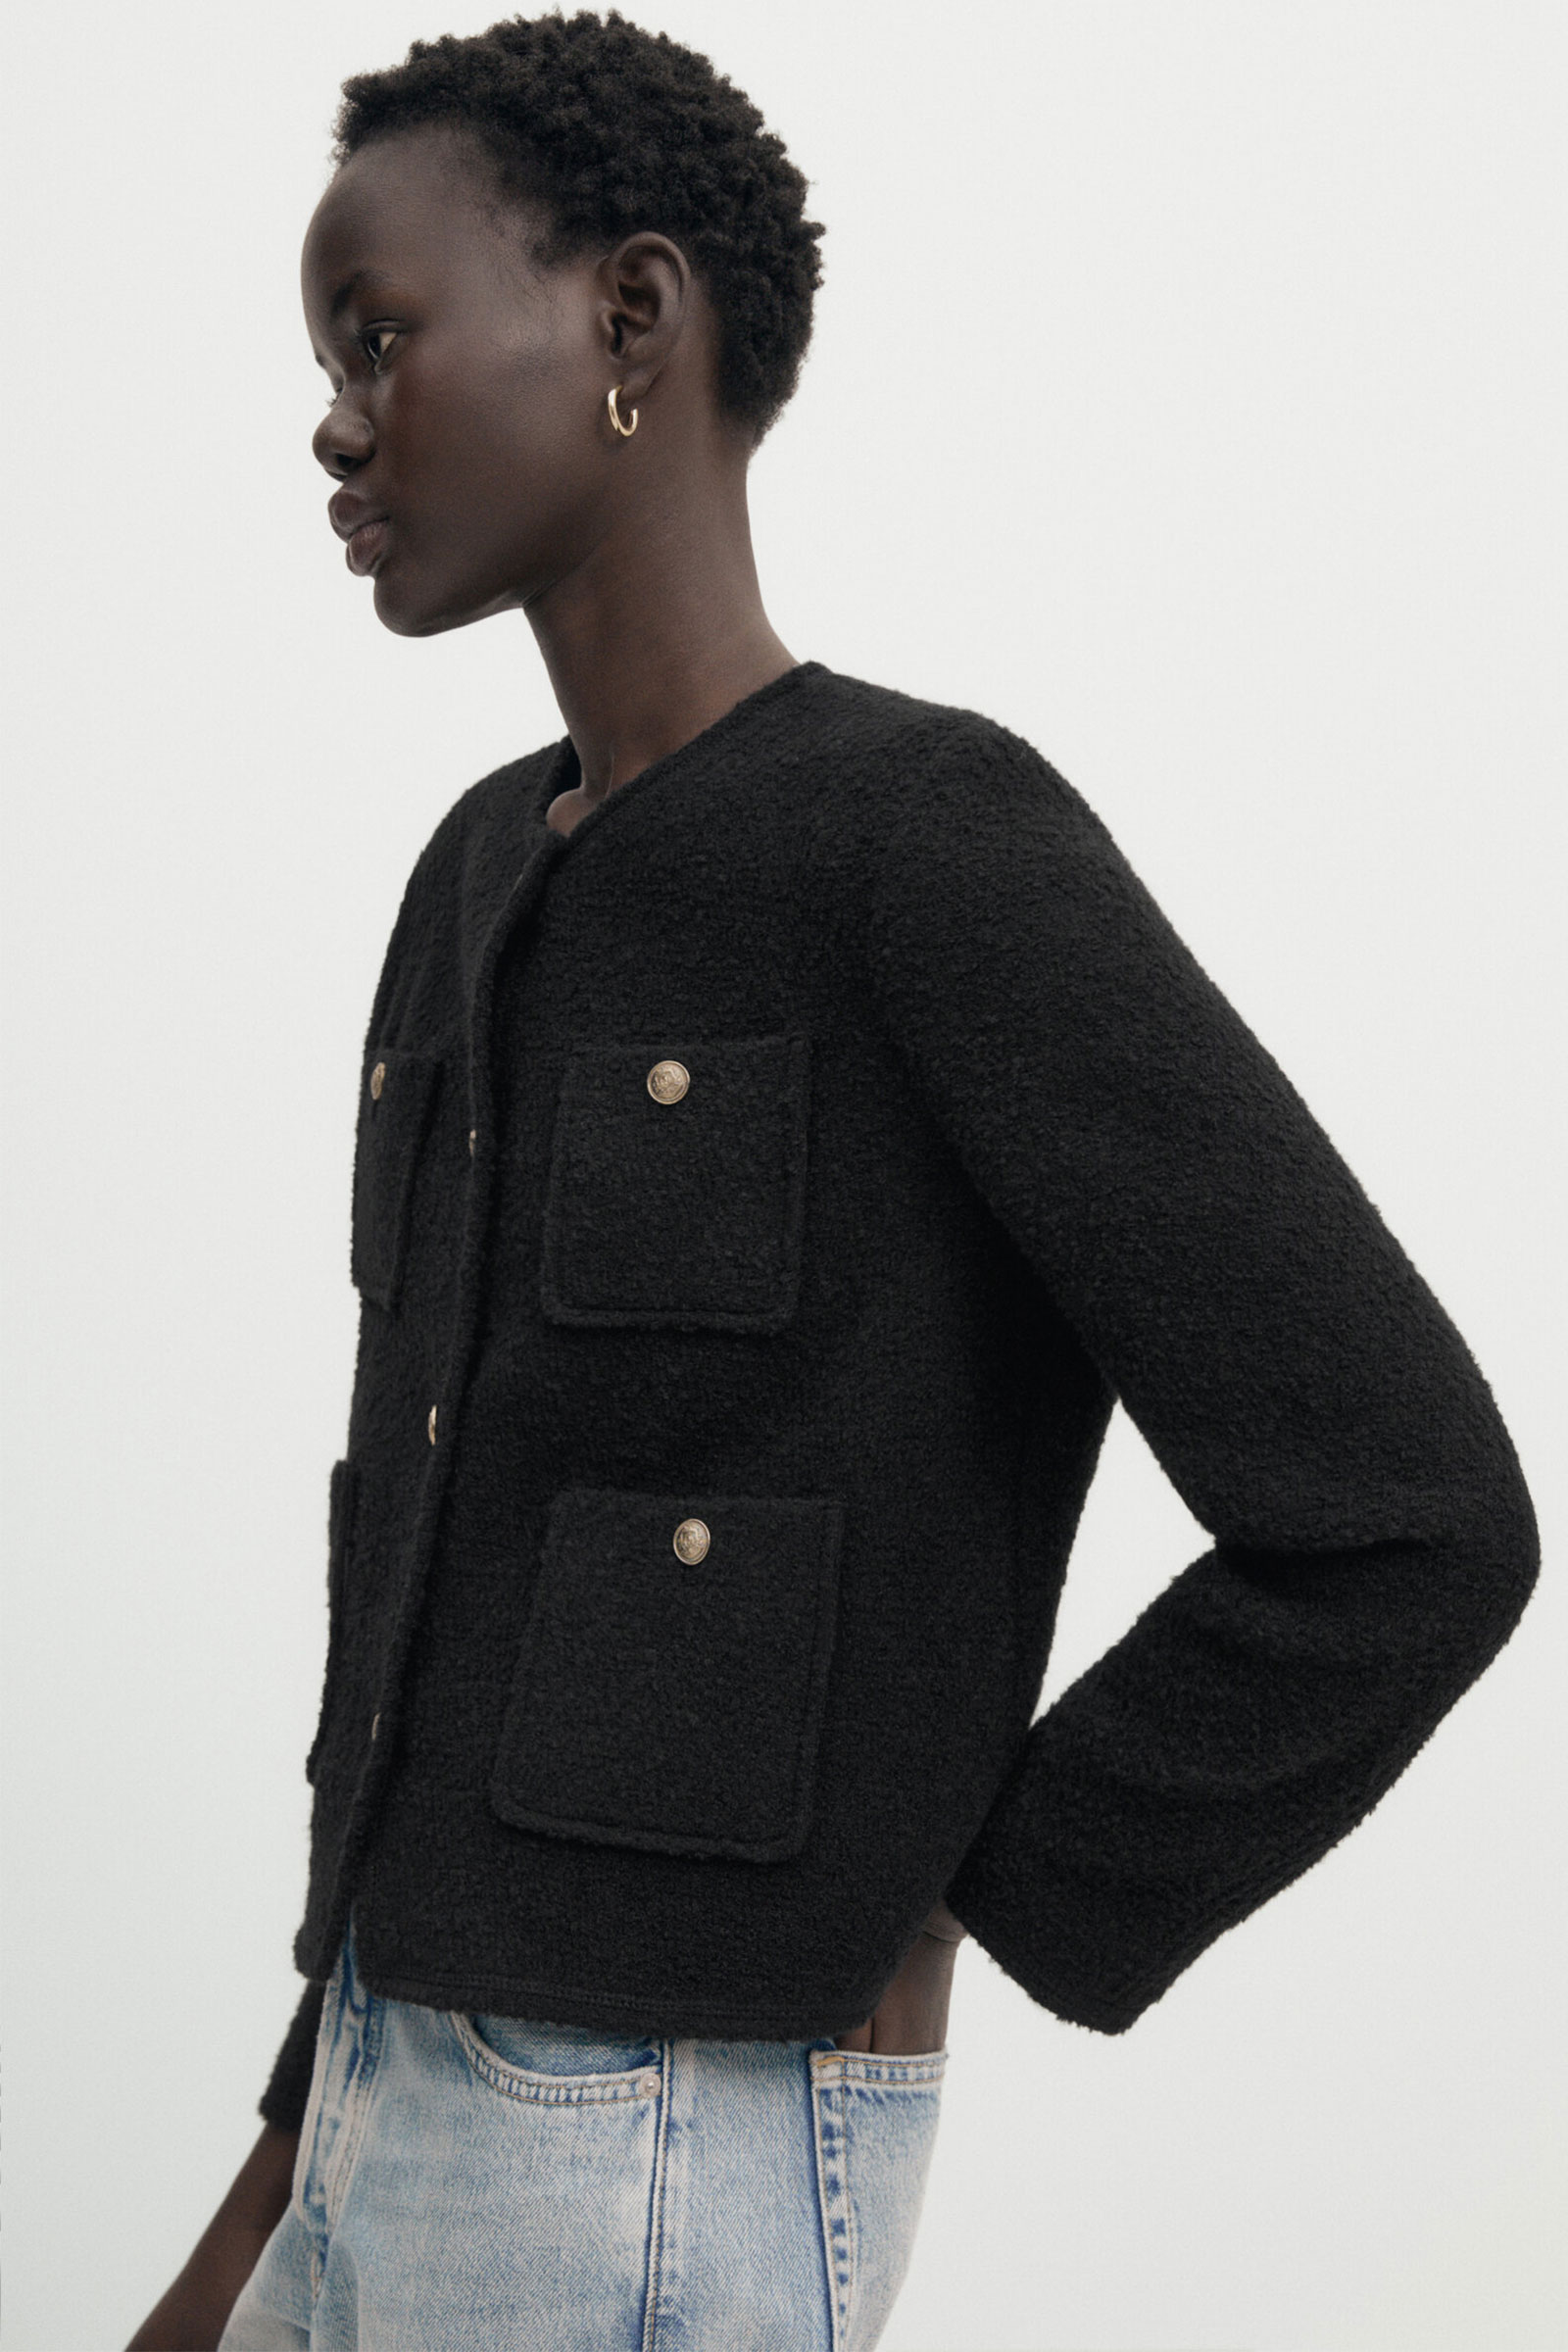 The bouclé jacket is trending right now